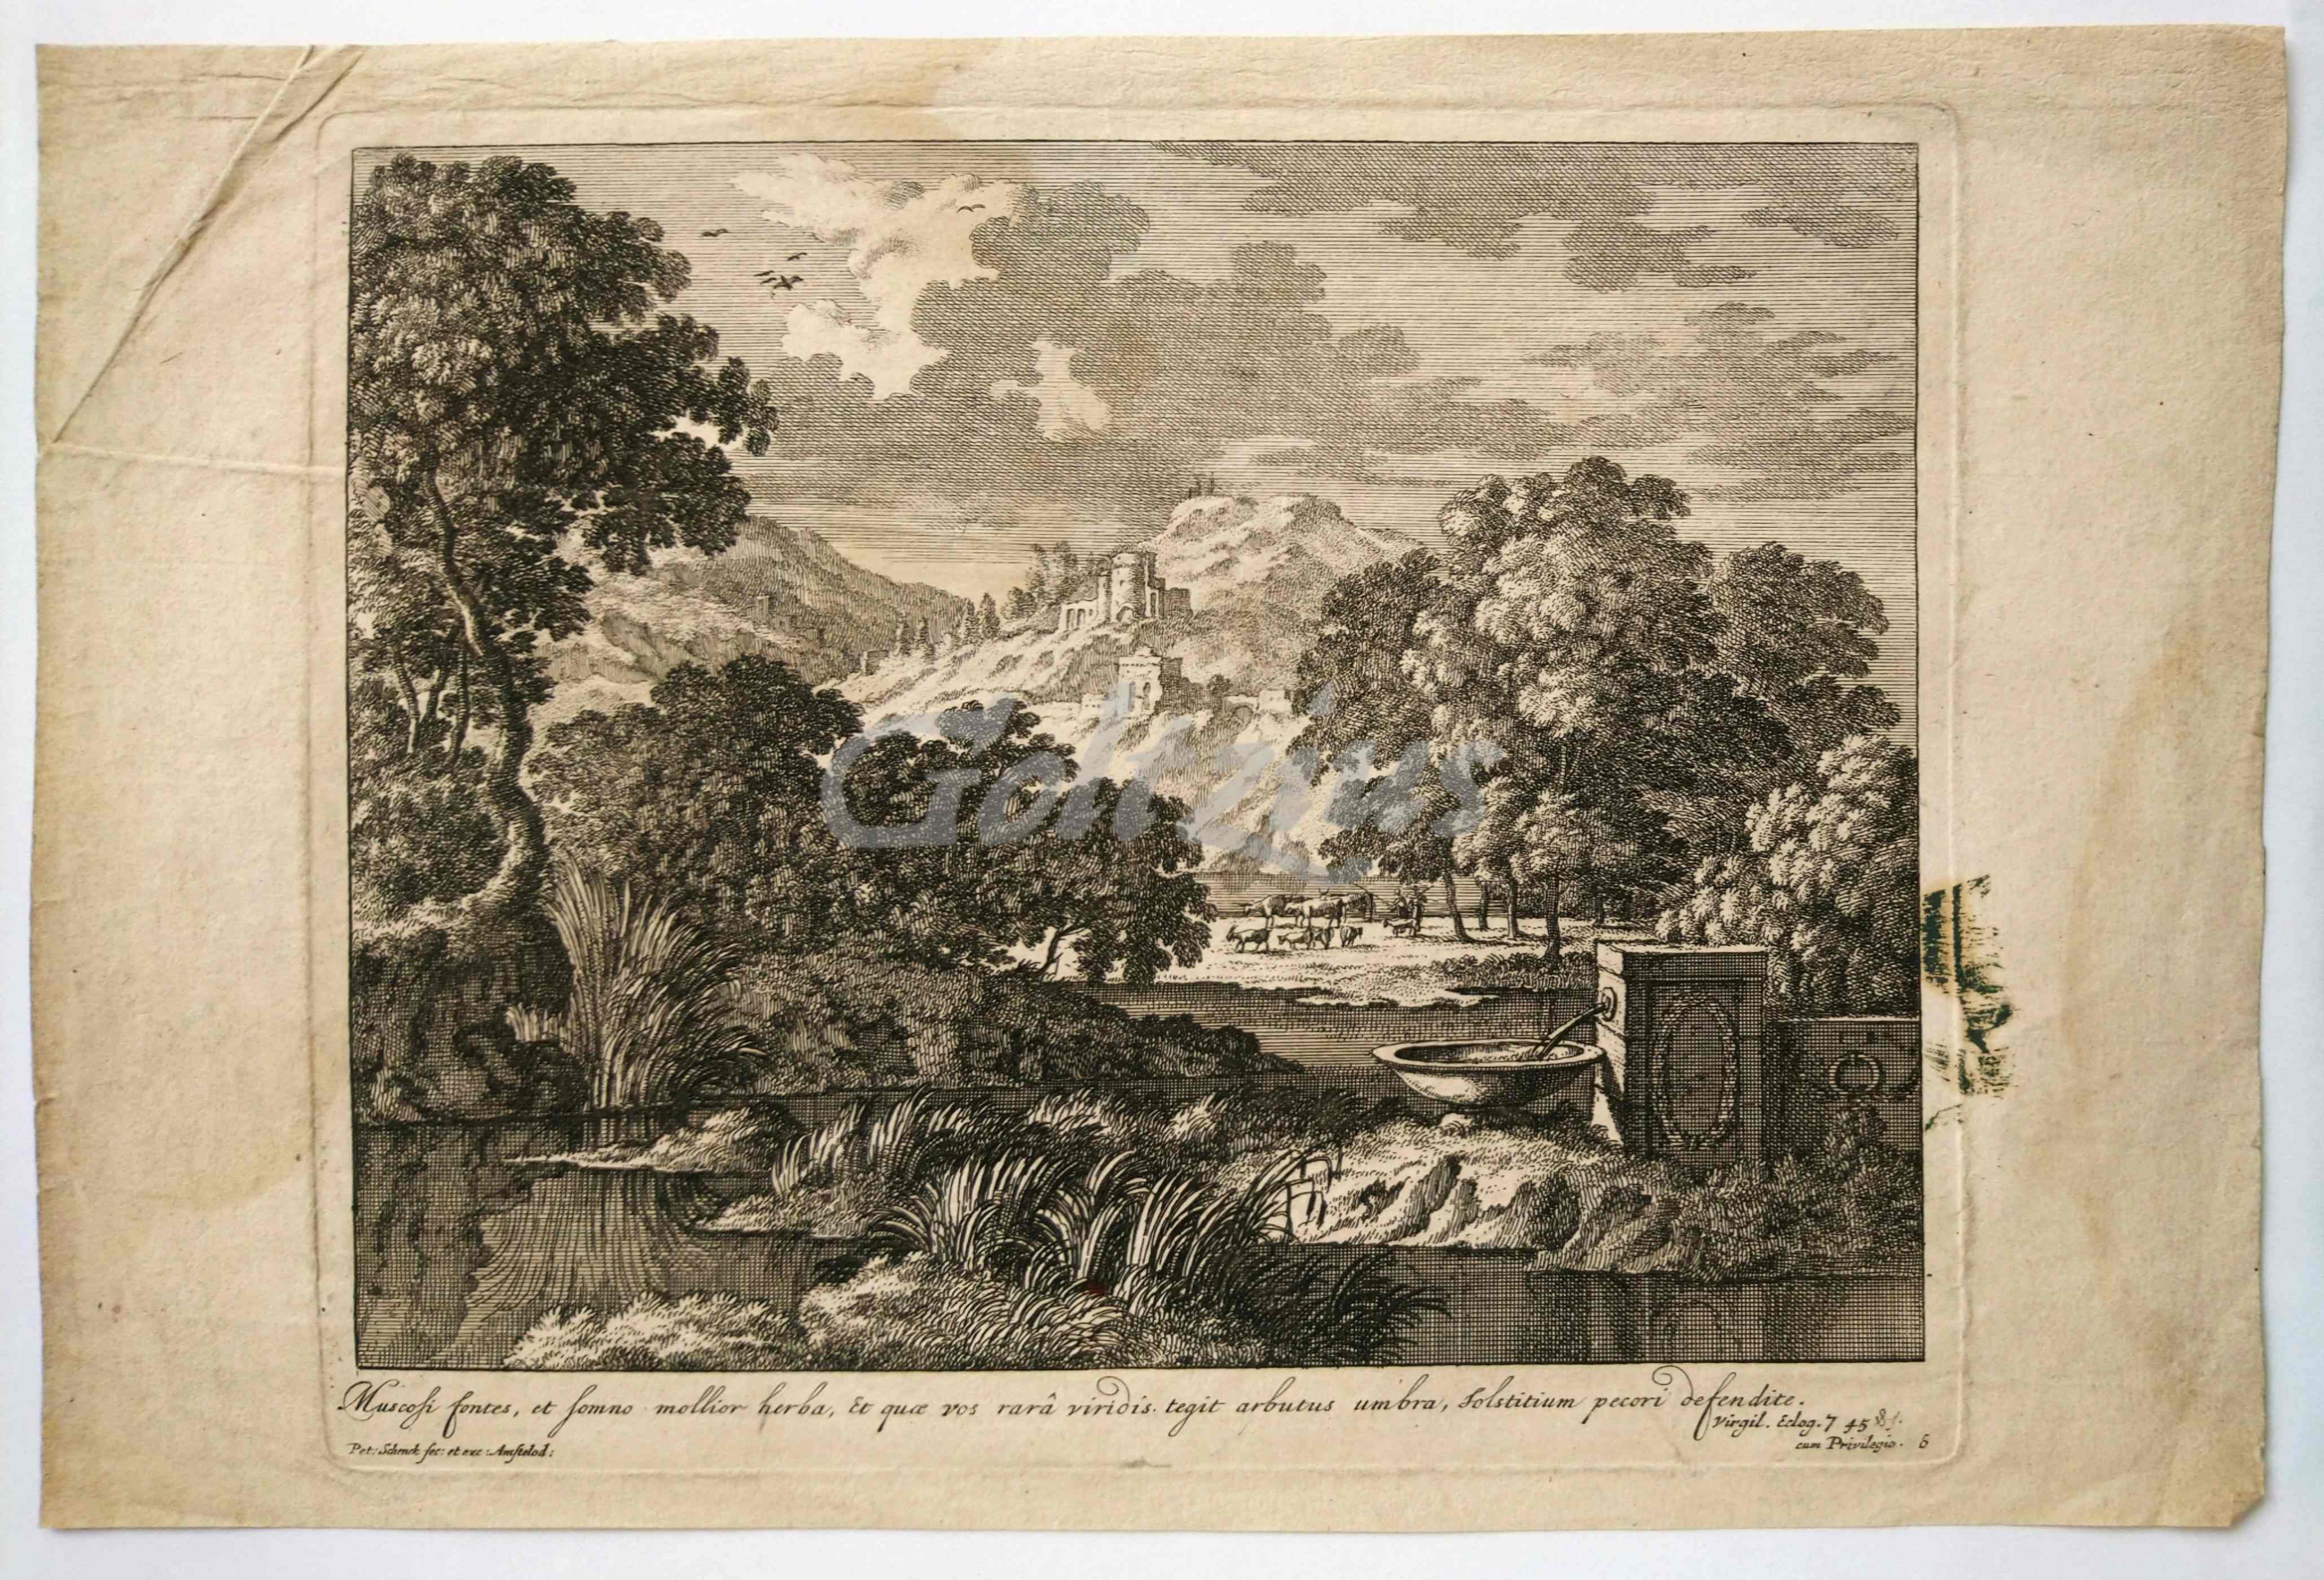 SCHENCK, PIETER (1660-1713), River landscape with reeds, fountain and ruins